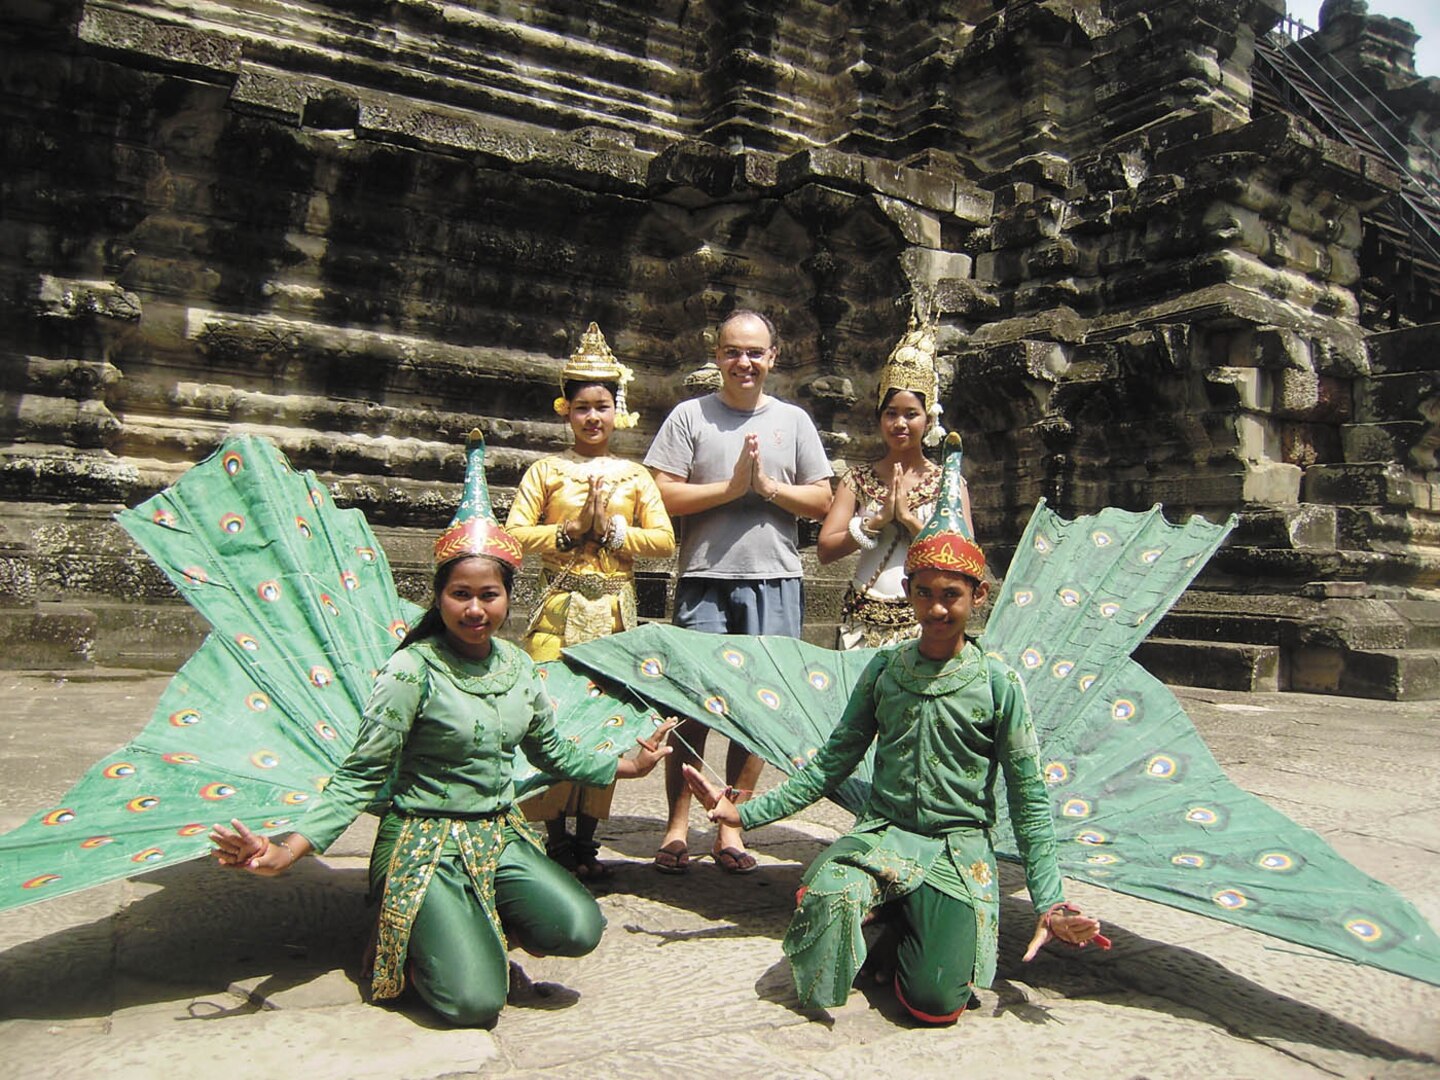 Michael Sheridan, Defense Language Institute English Language Center senior instructor, stands with locals outside the ruins of Angkor Wat, a 12th century stone temple in Angkor, Cambodia. In 2009, Mr. Sheridan spent six months providing language and technical assistance to Cambodian instructors in the first extended in-country training for the DLIELC nonresident program in the country. (Courtesy photo)